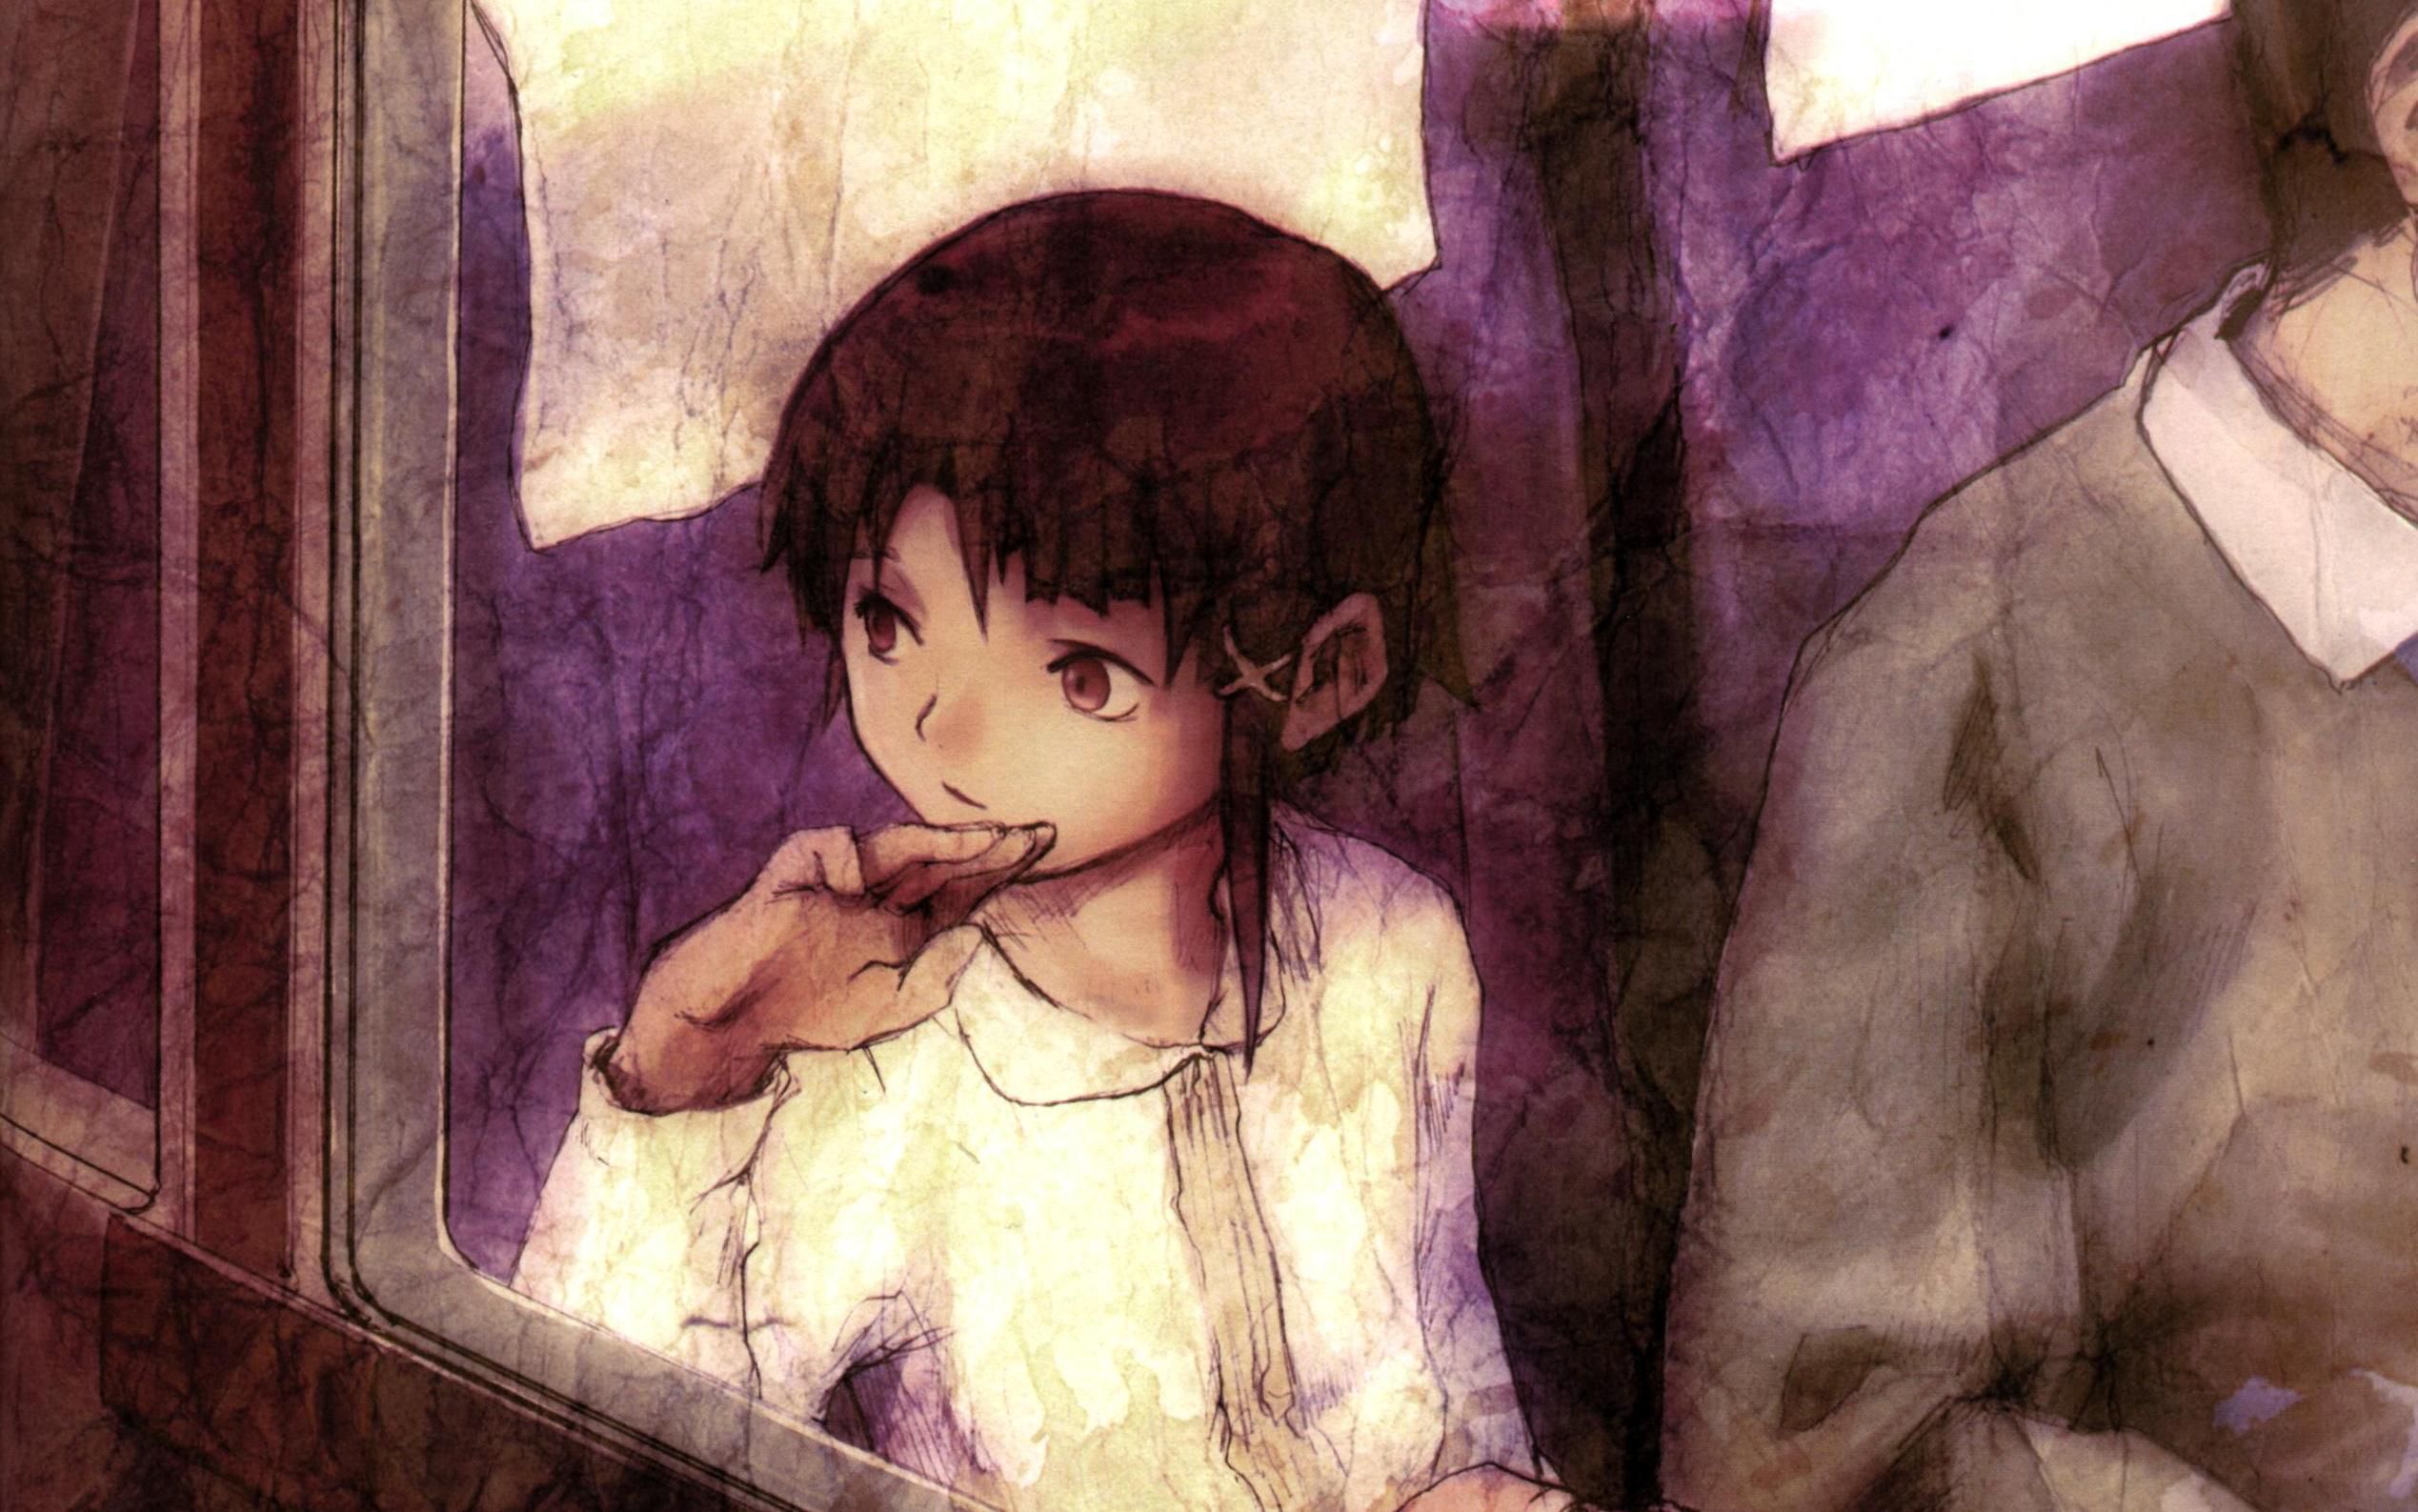 Serial Experiments Lain аниме